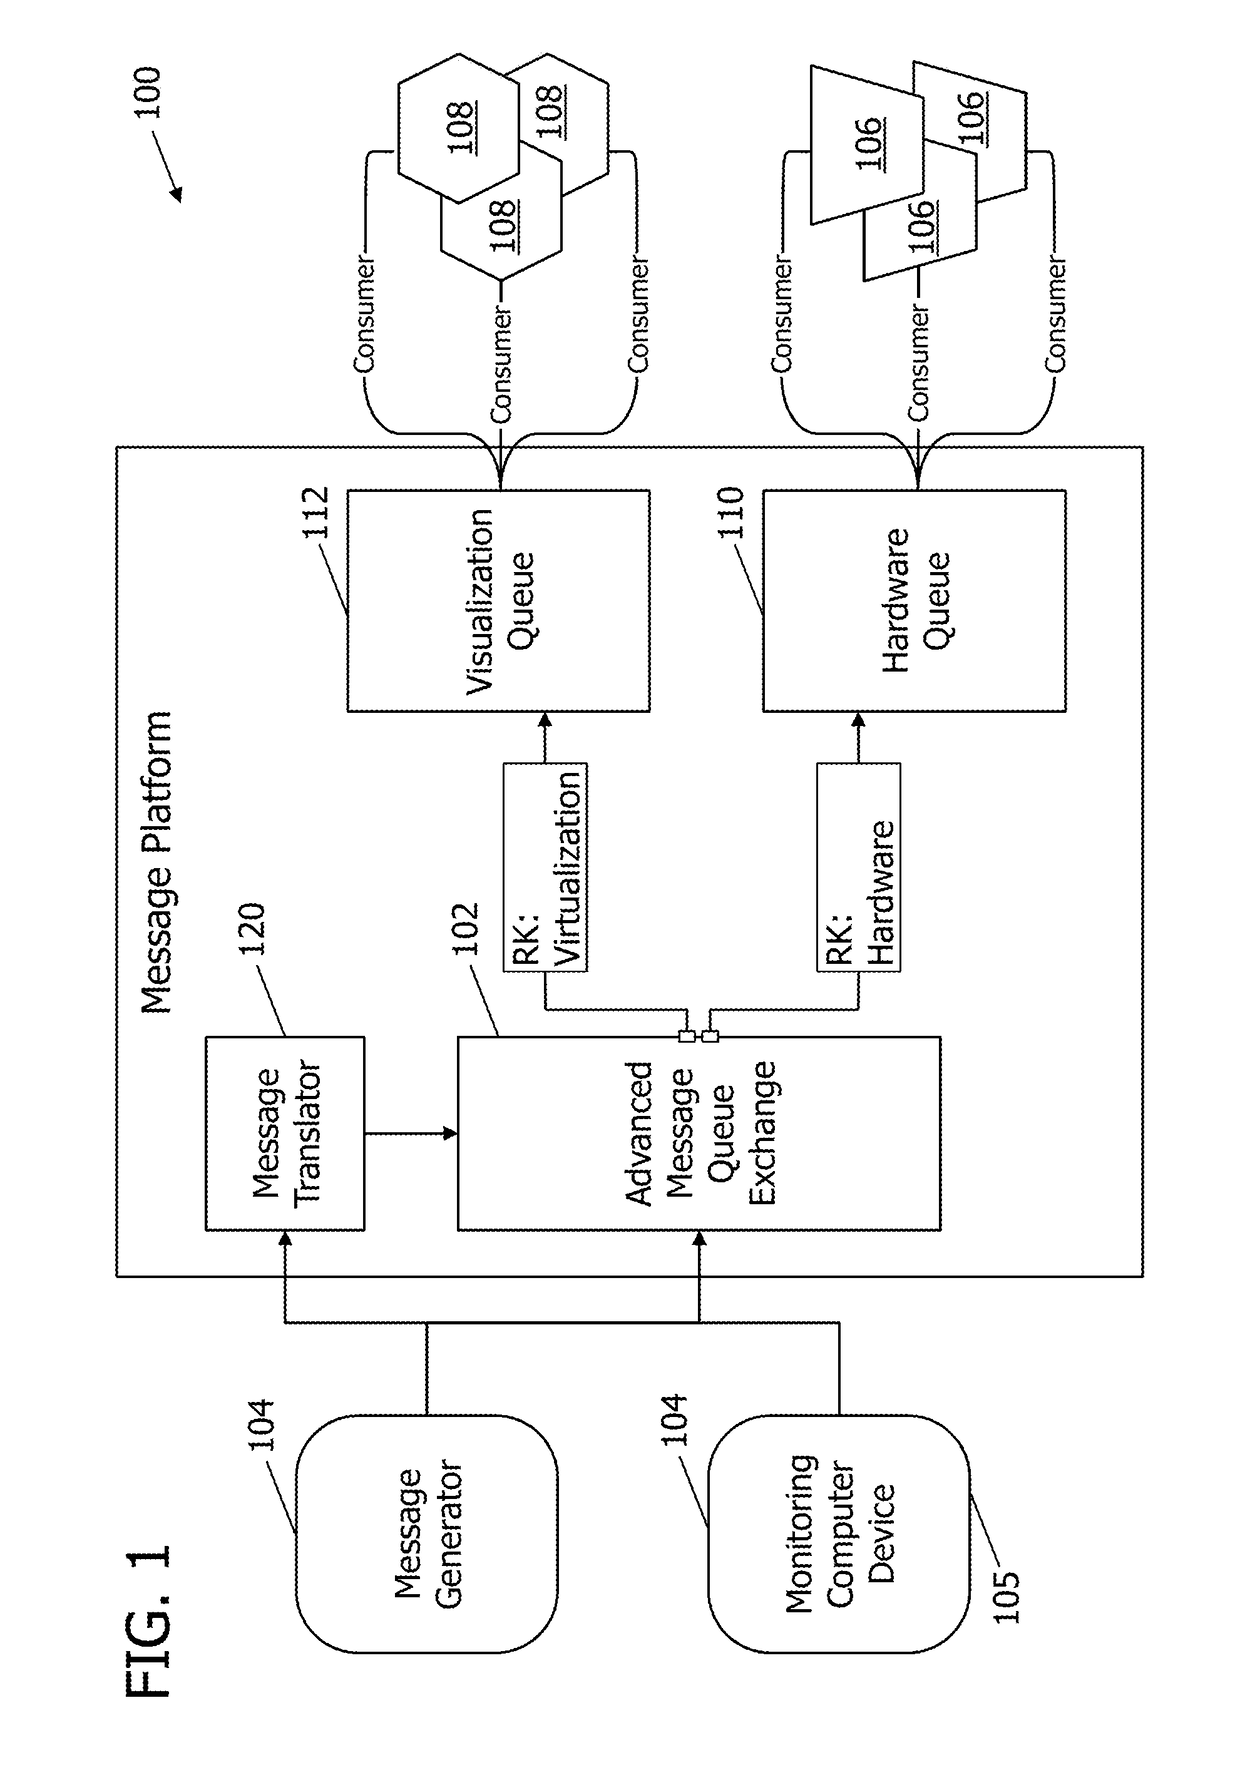 Systems and methods for dynamically commissioning and decommissioning computer components